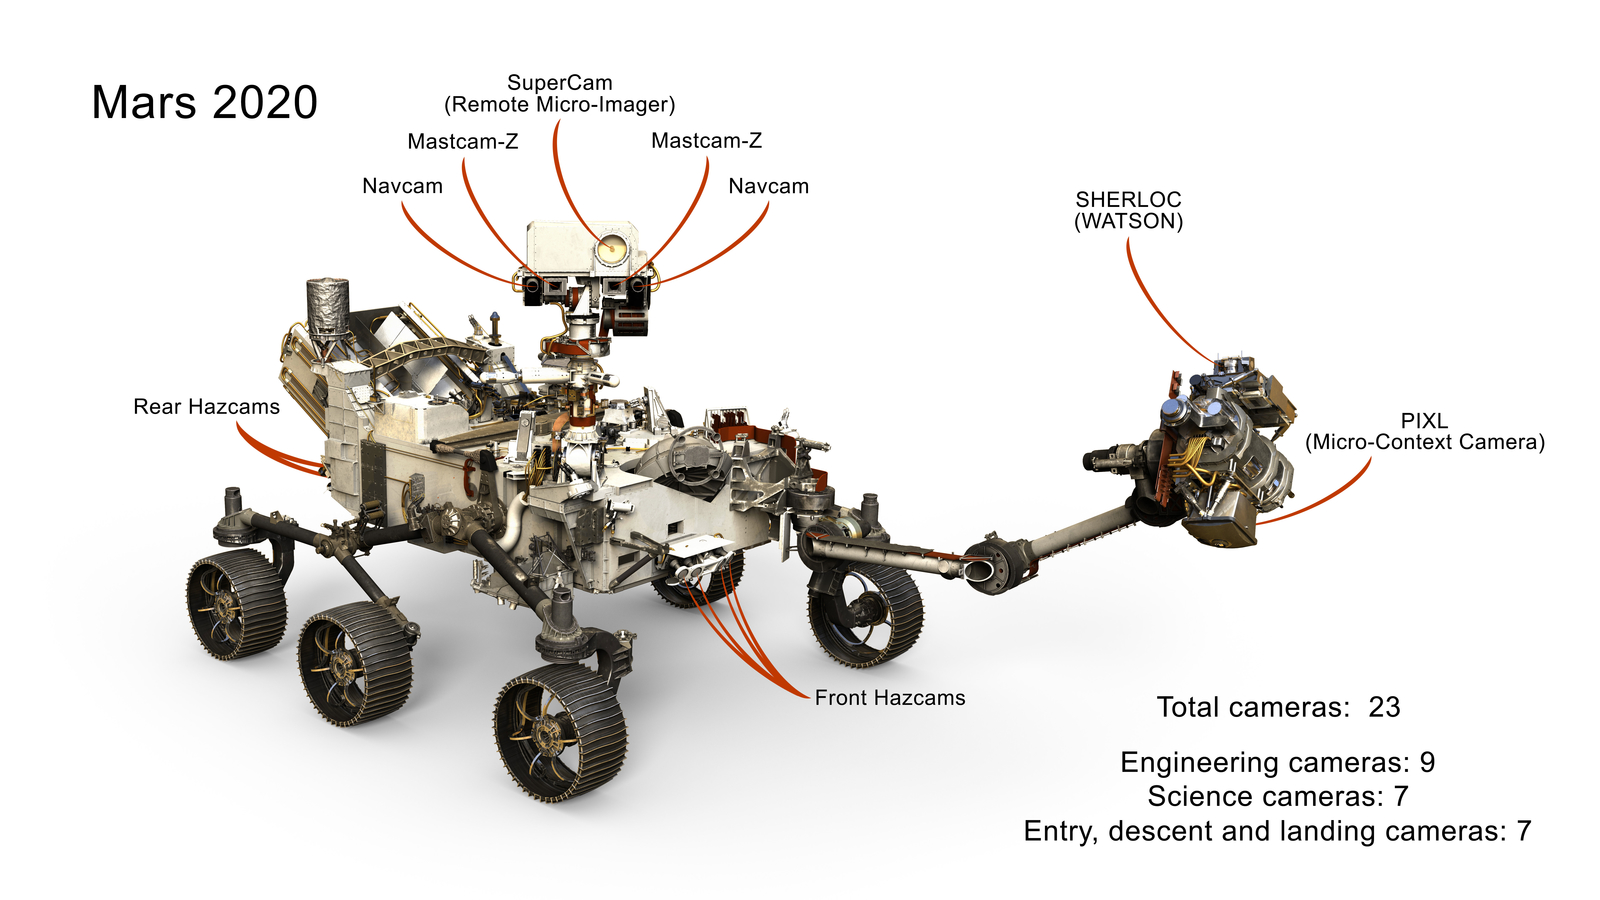 Mars 2020 cameras labeled on a model of the rover